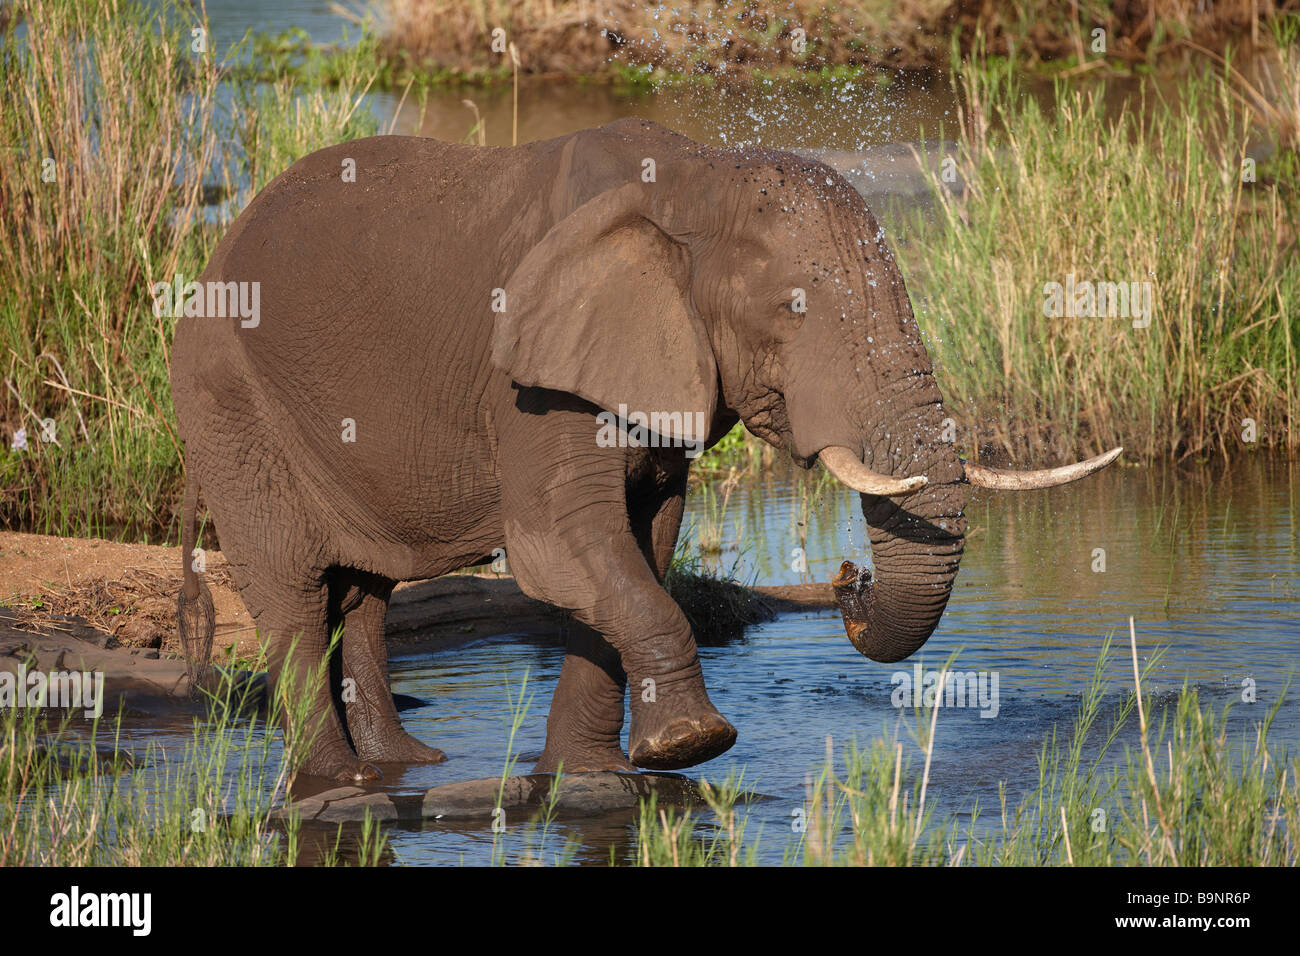 African elephant taking a bath in a river, Kruger National Park, South Africa Stock Photo